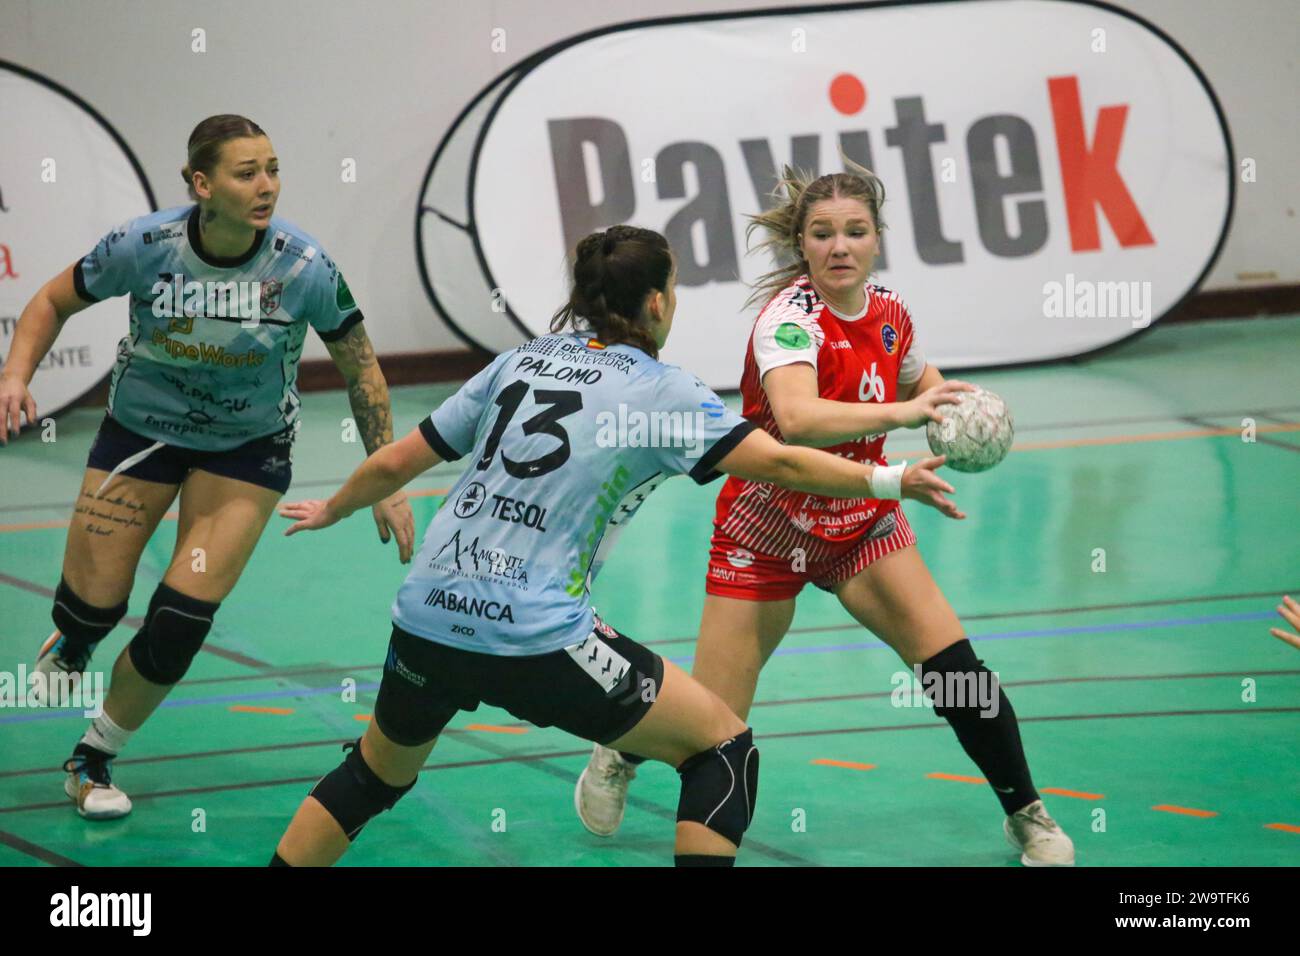 Gijon, Spain. 29th Dec, 2023. Motive.co Gijon Balonmano La Calzada player, Dorottya Margit Zentai (66, R) tries to get away from Maria Palomo (13, L) during the 13th matchday of the Liga Guerreras Iberdrola 2023- 24 between Motive.co Gijon Balonmano La Calzada and Mecalia Atletico Guardes, on December 29, 2023, at the La Arena Pavilion, in Gijon, Spain. (Photo by Alberto Brevers/Pacific Press) Credit: Pacific Press Media Production Corp./Alamy Live News Stock Photo